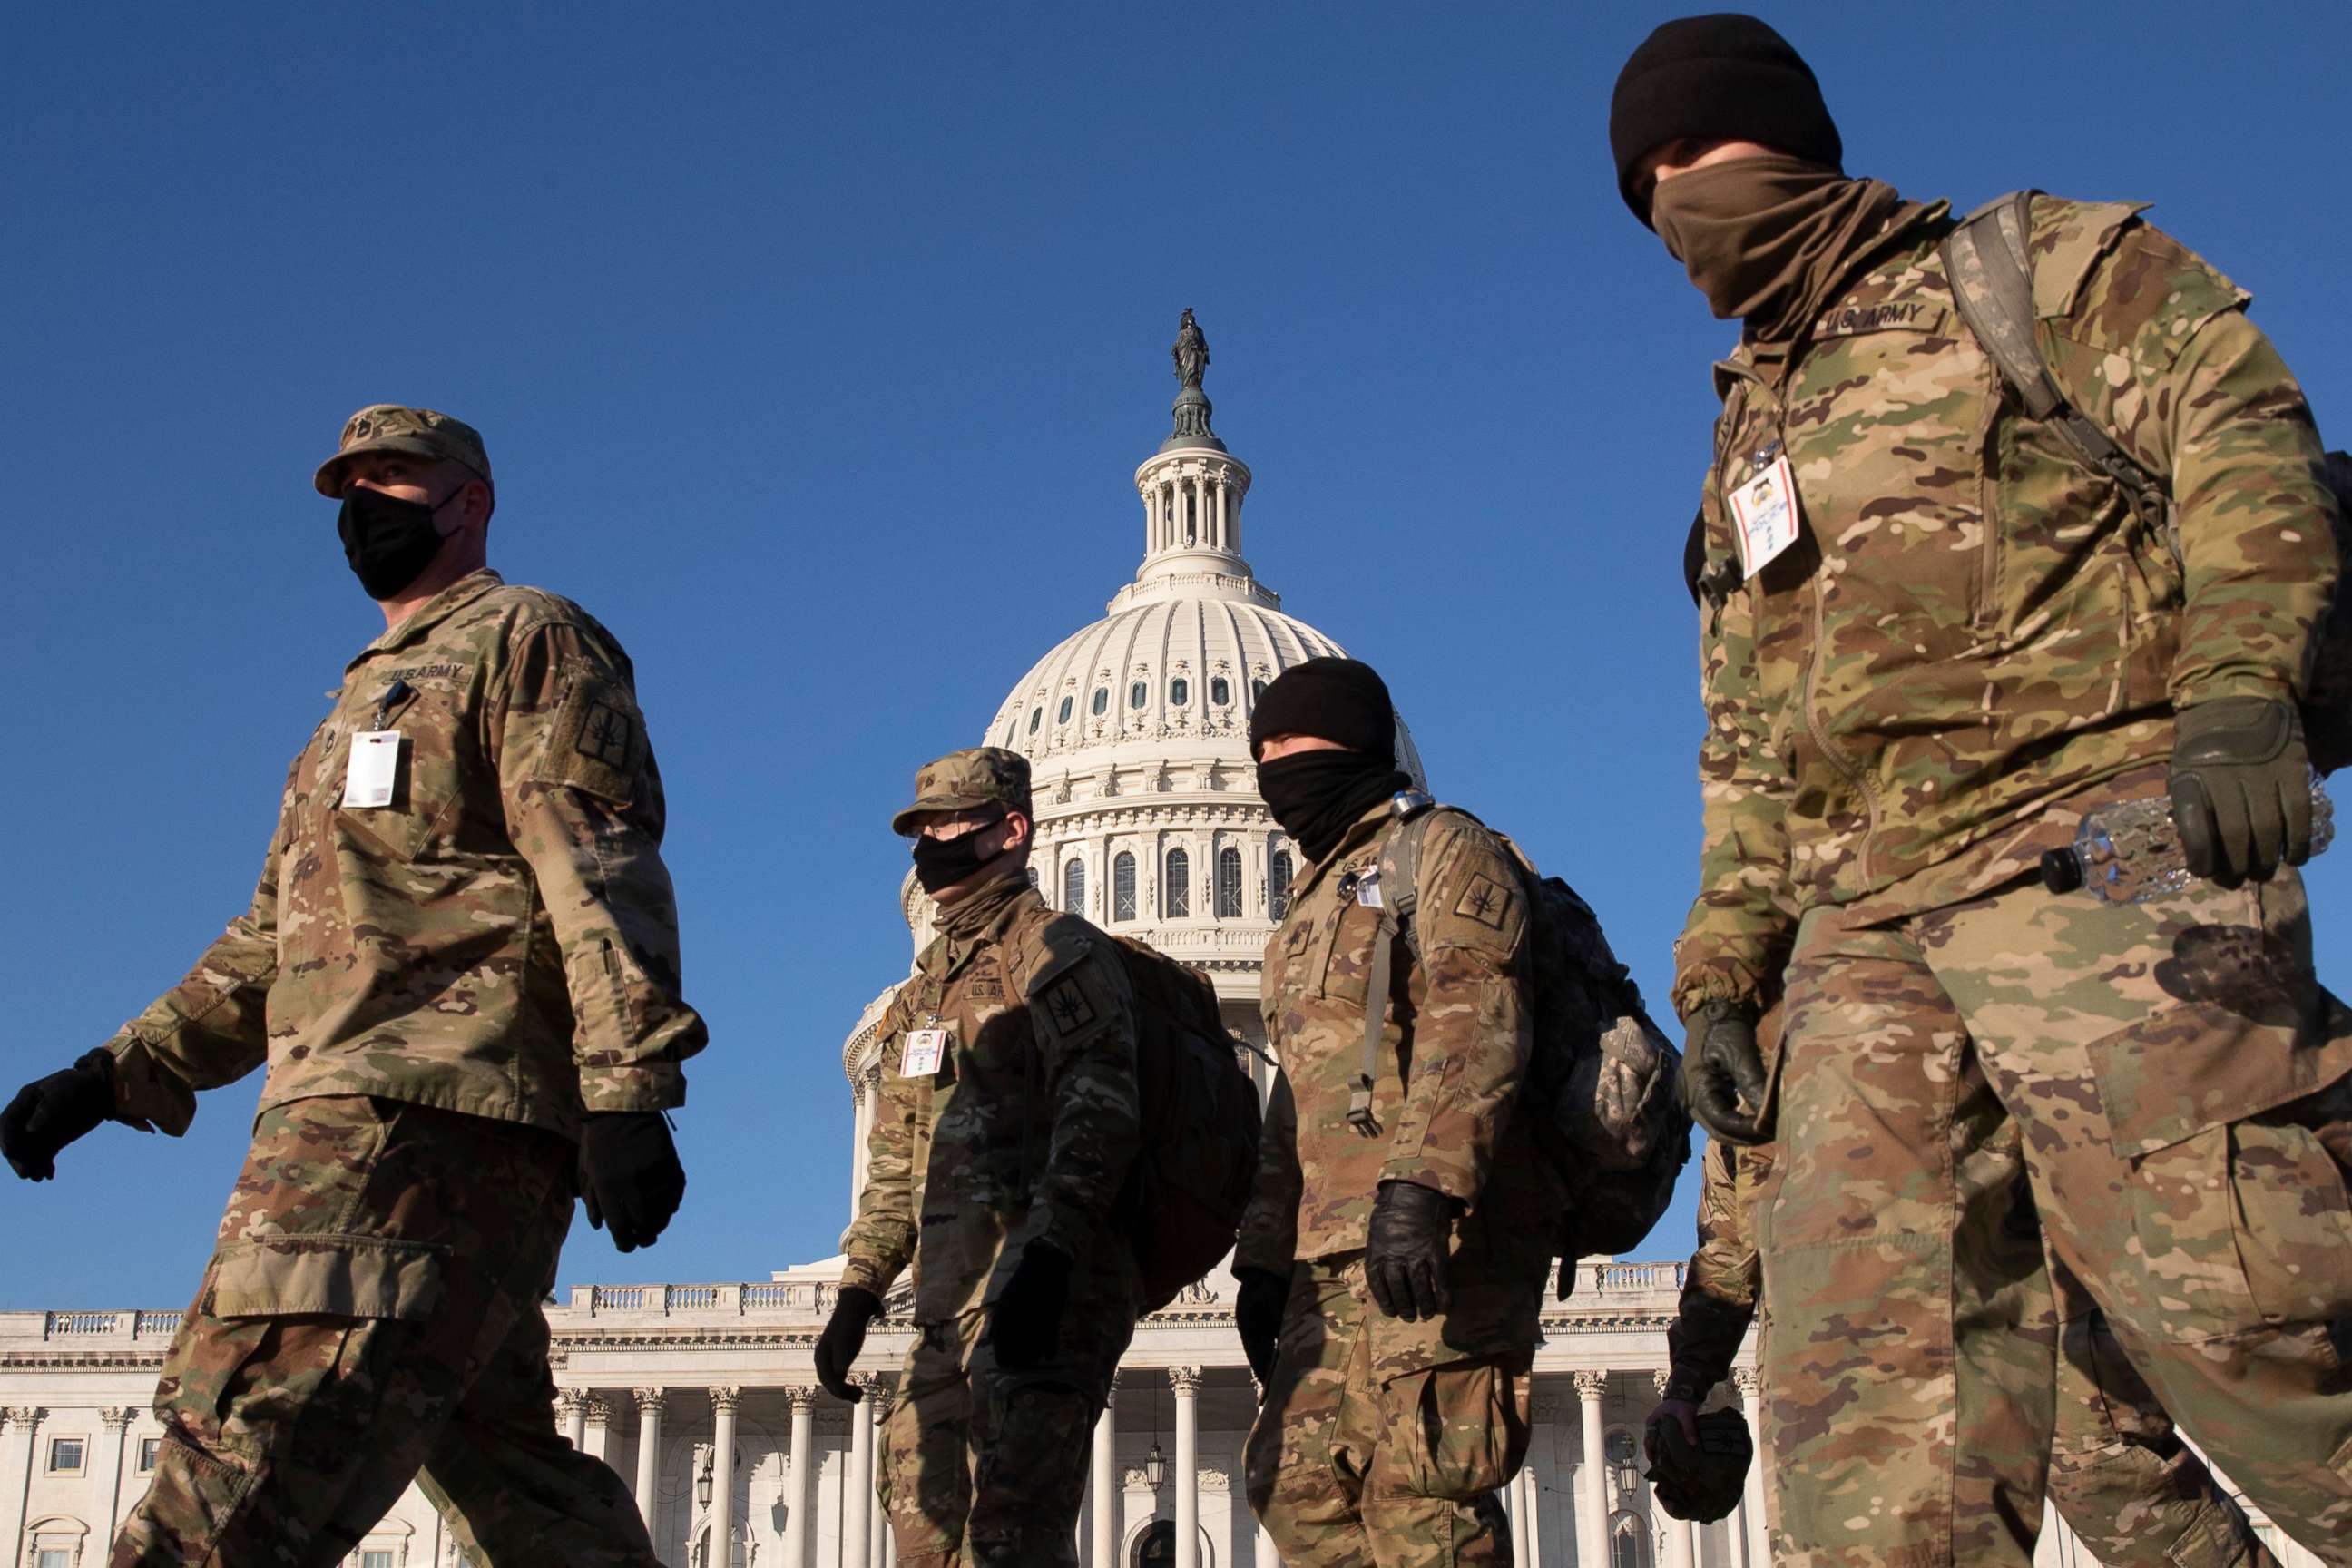 PHOTO: Members of the National Guard walk on the grounds of the East Front of the U.S. Capitol in Washington, D.C, Jan. 12, 2021.